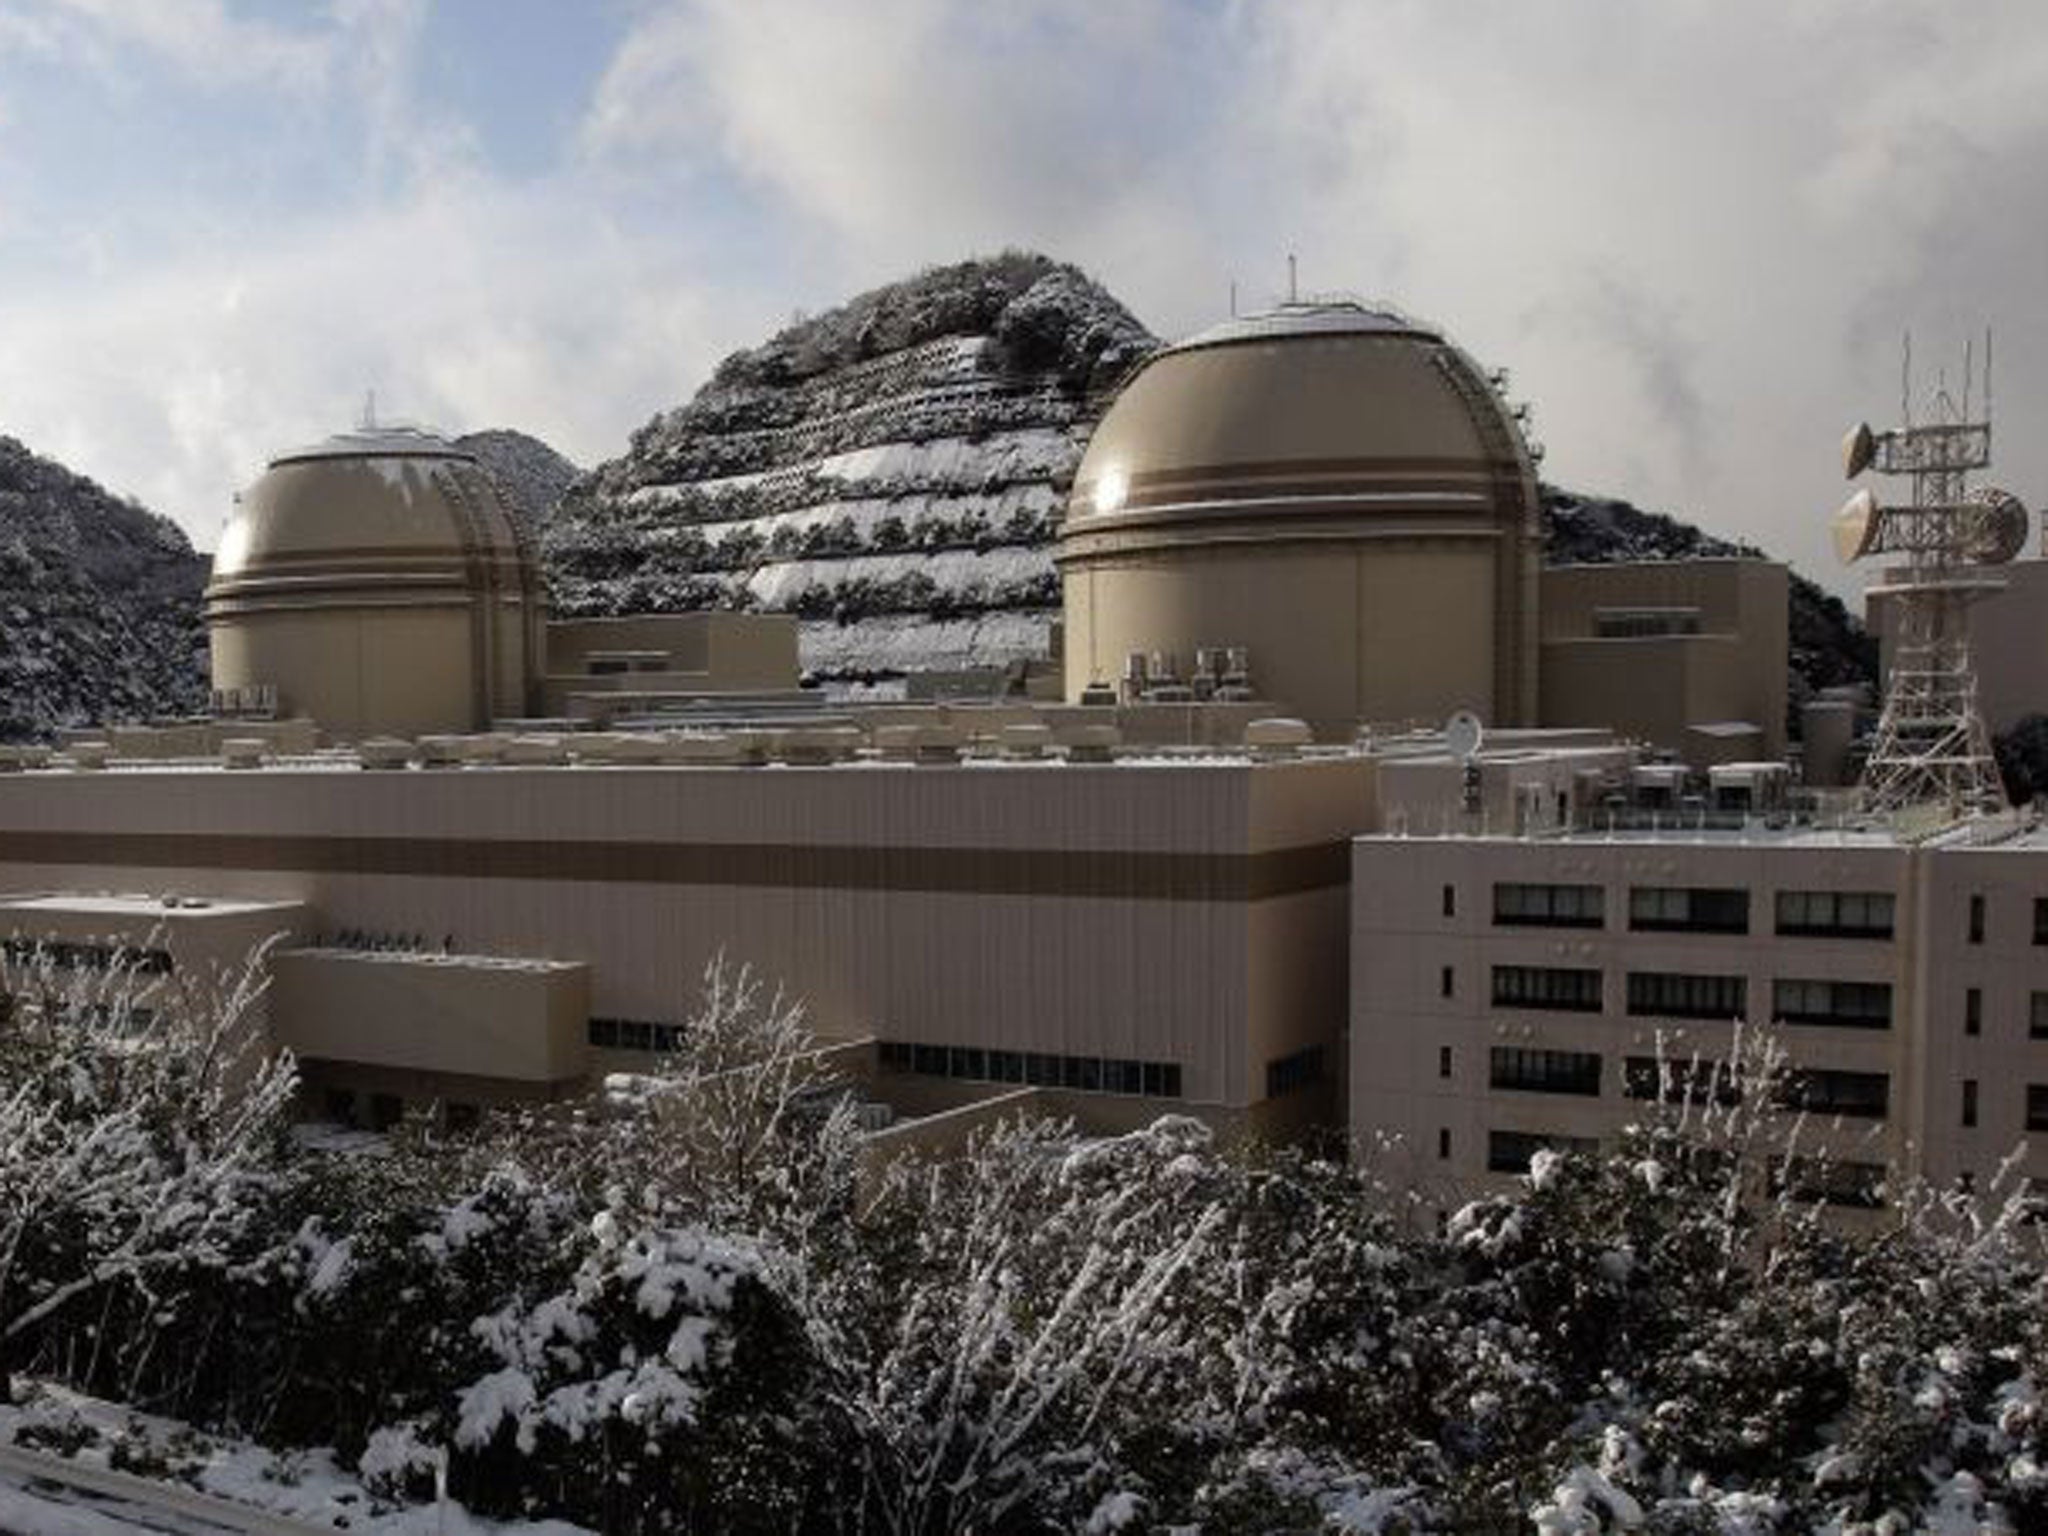 the No. 4 reactor, left, and the No. 3 reactor at Kansai Electric Power Co's Ohi nuclear power plant in Ohi, Fukui prefecture, western Japan